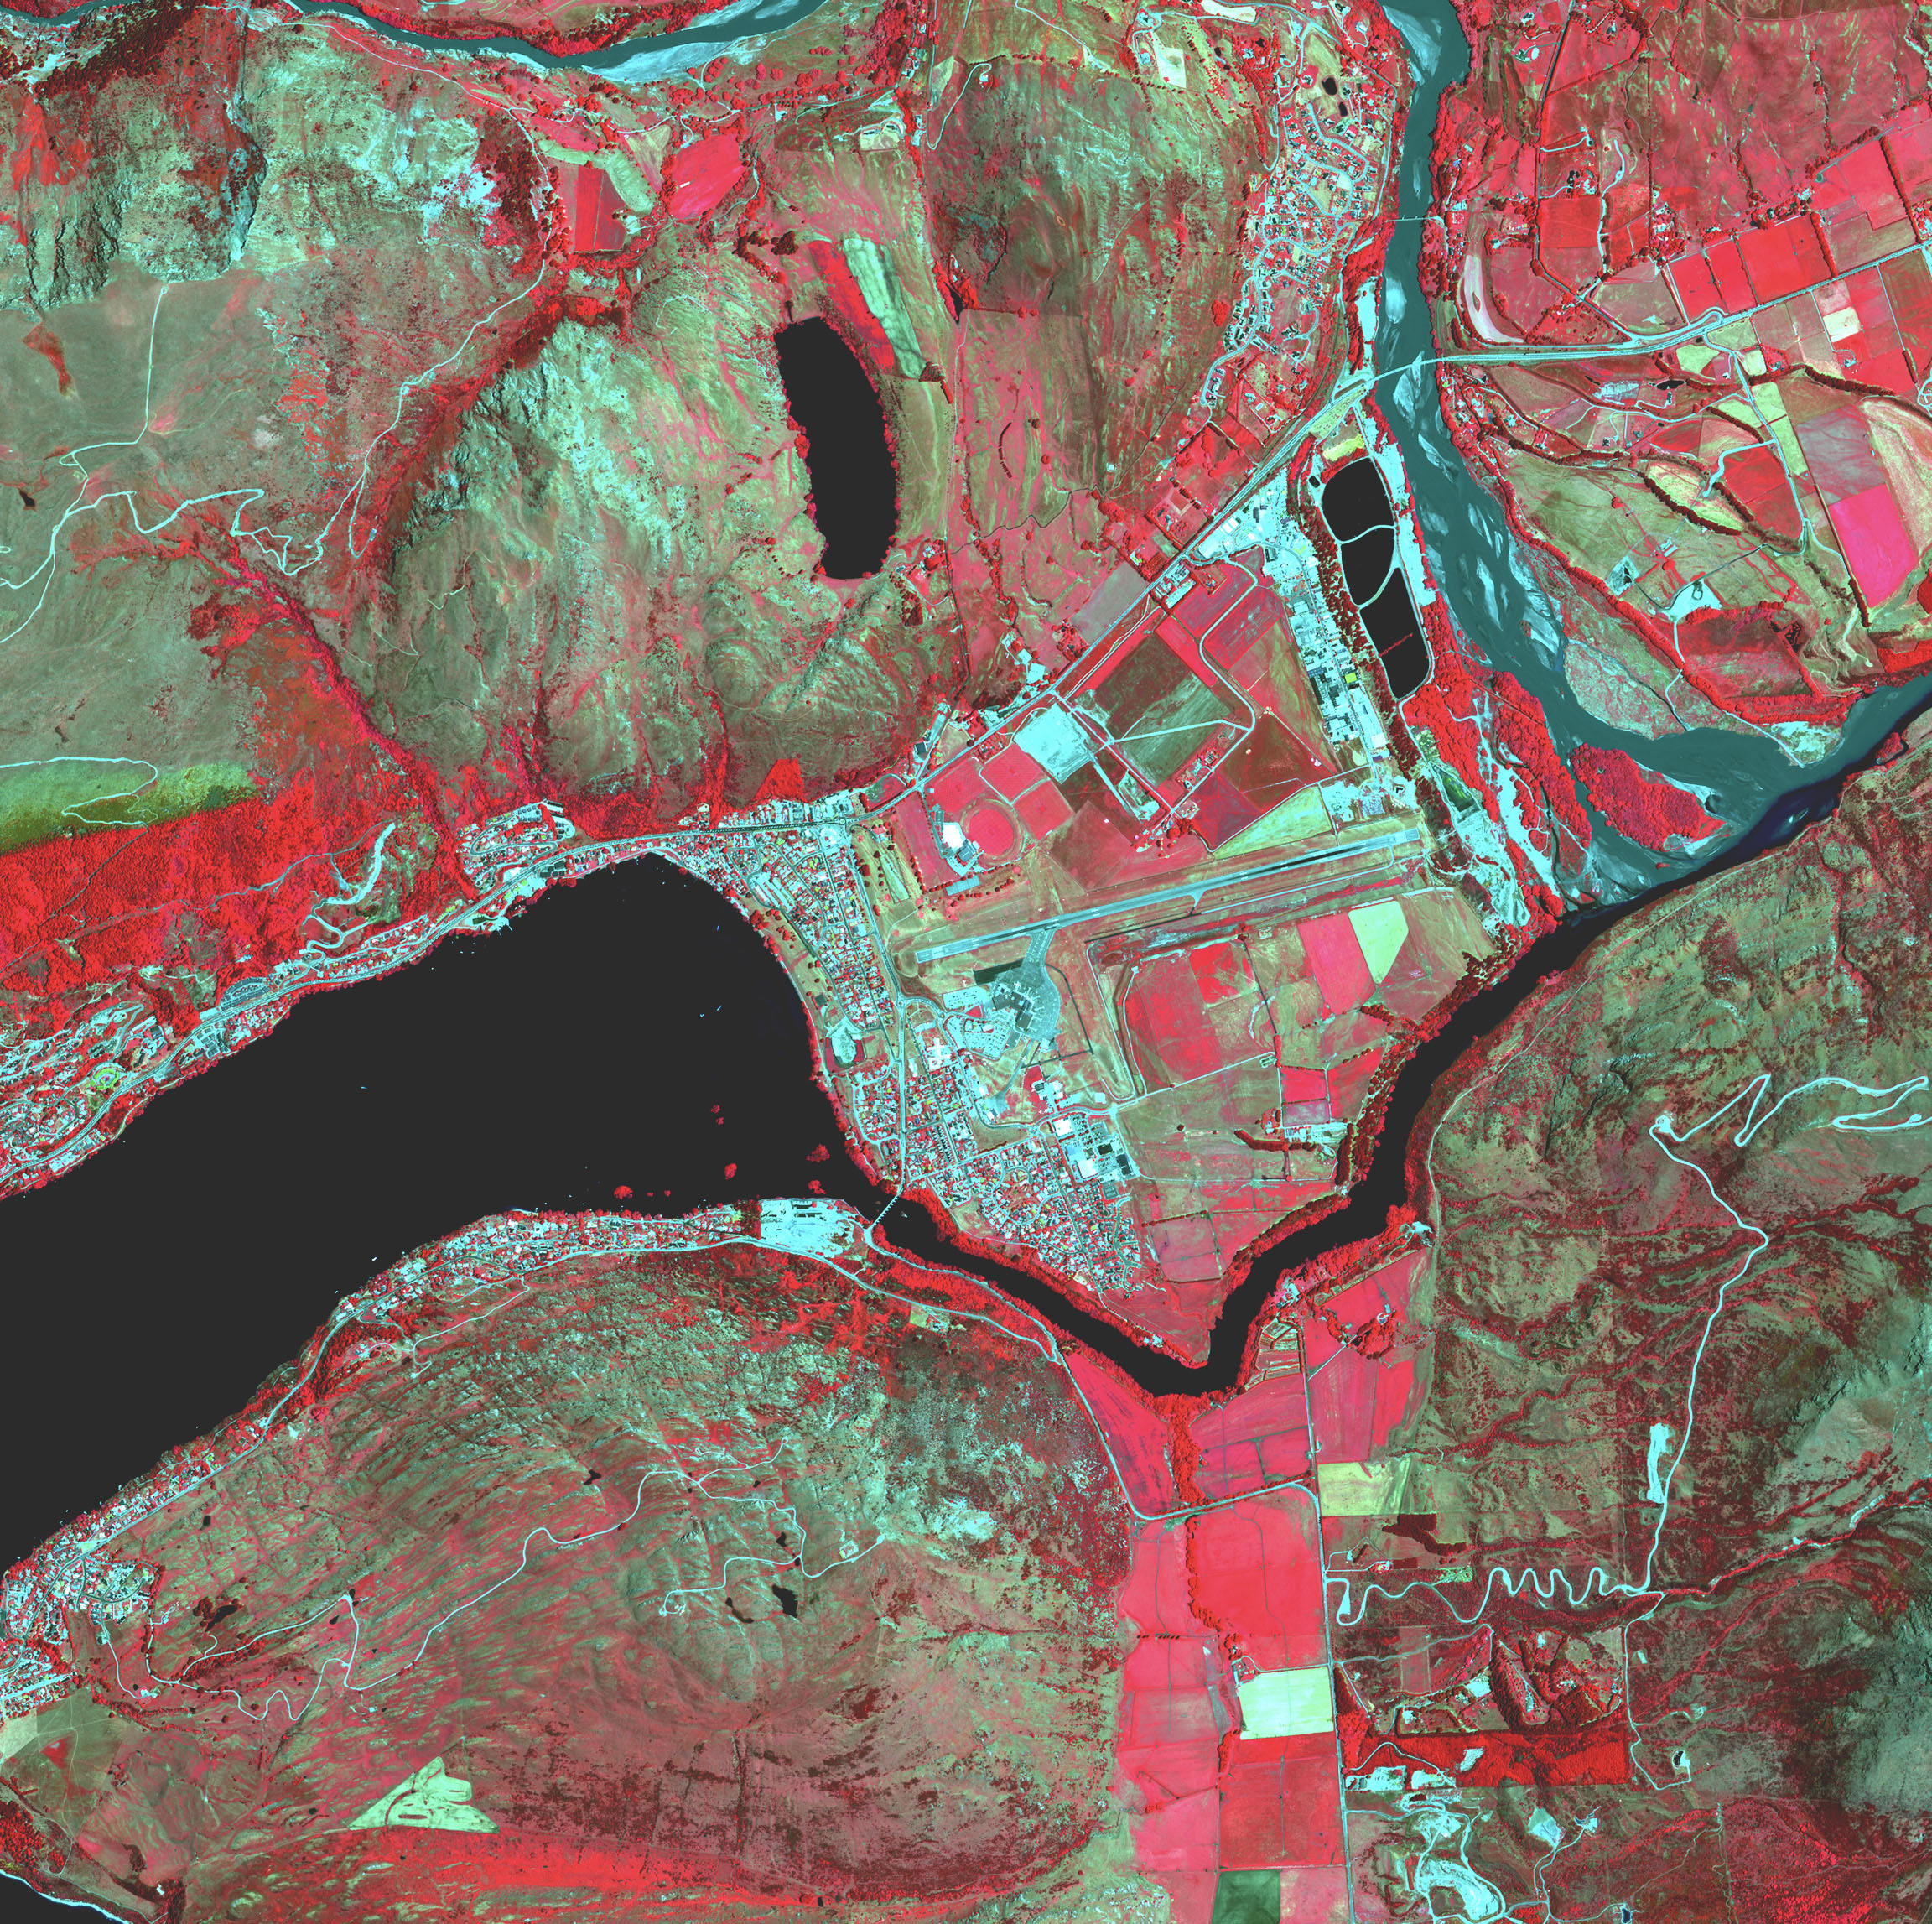 A map of a town next to a river shows hot spots and farm fields in shades of red